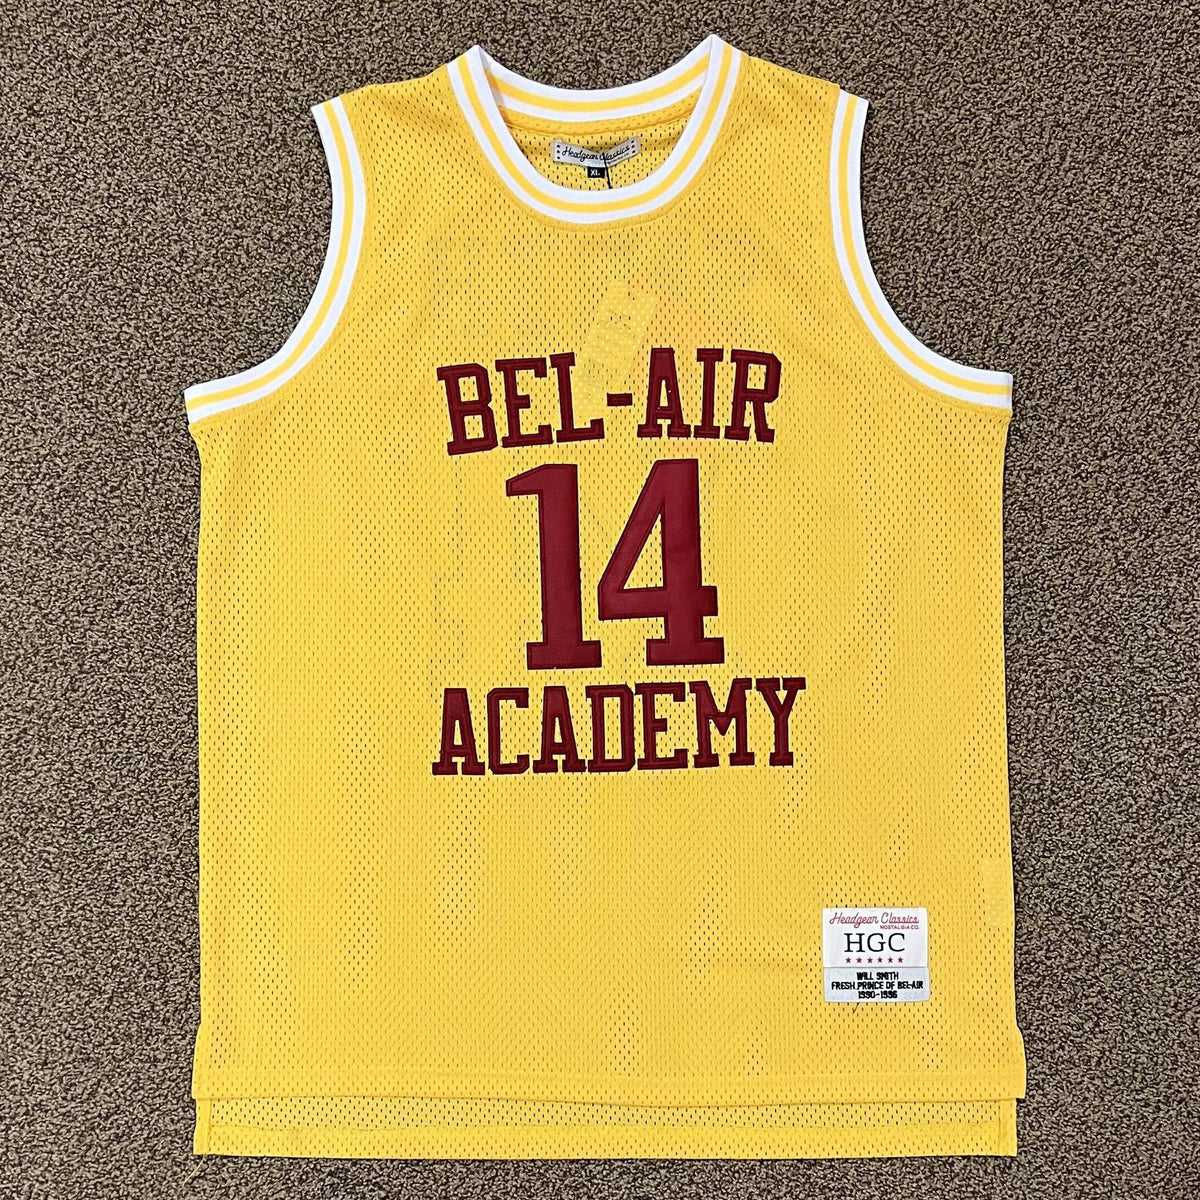 will smith bel air basketball